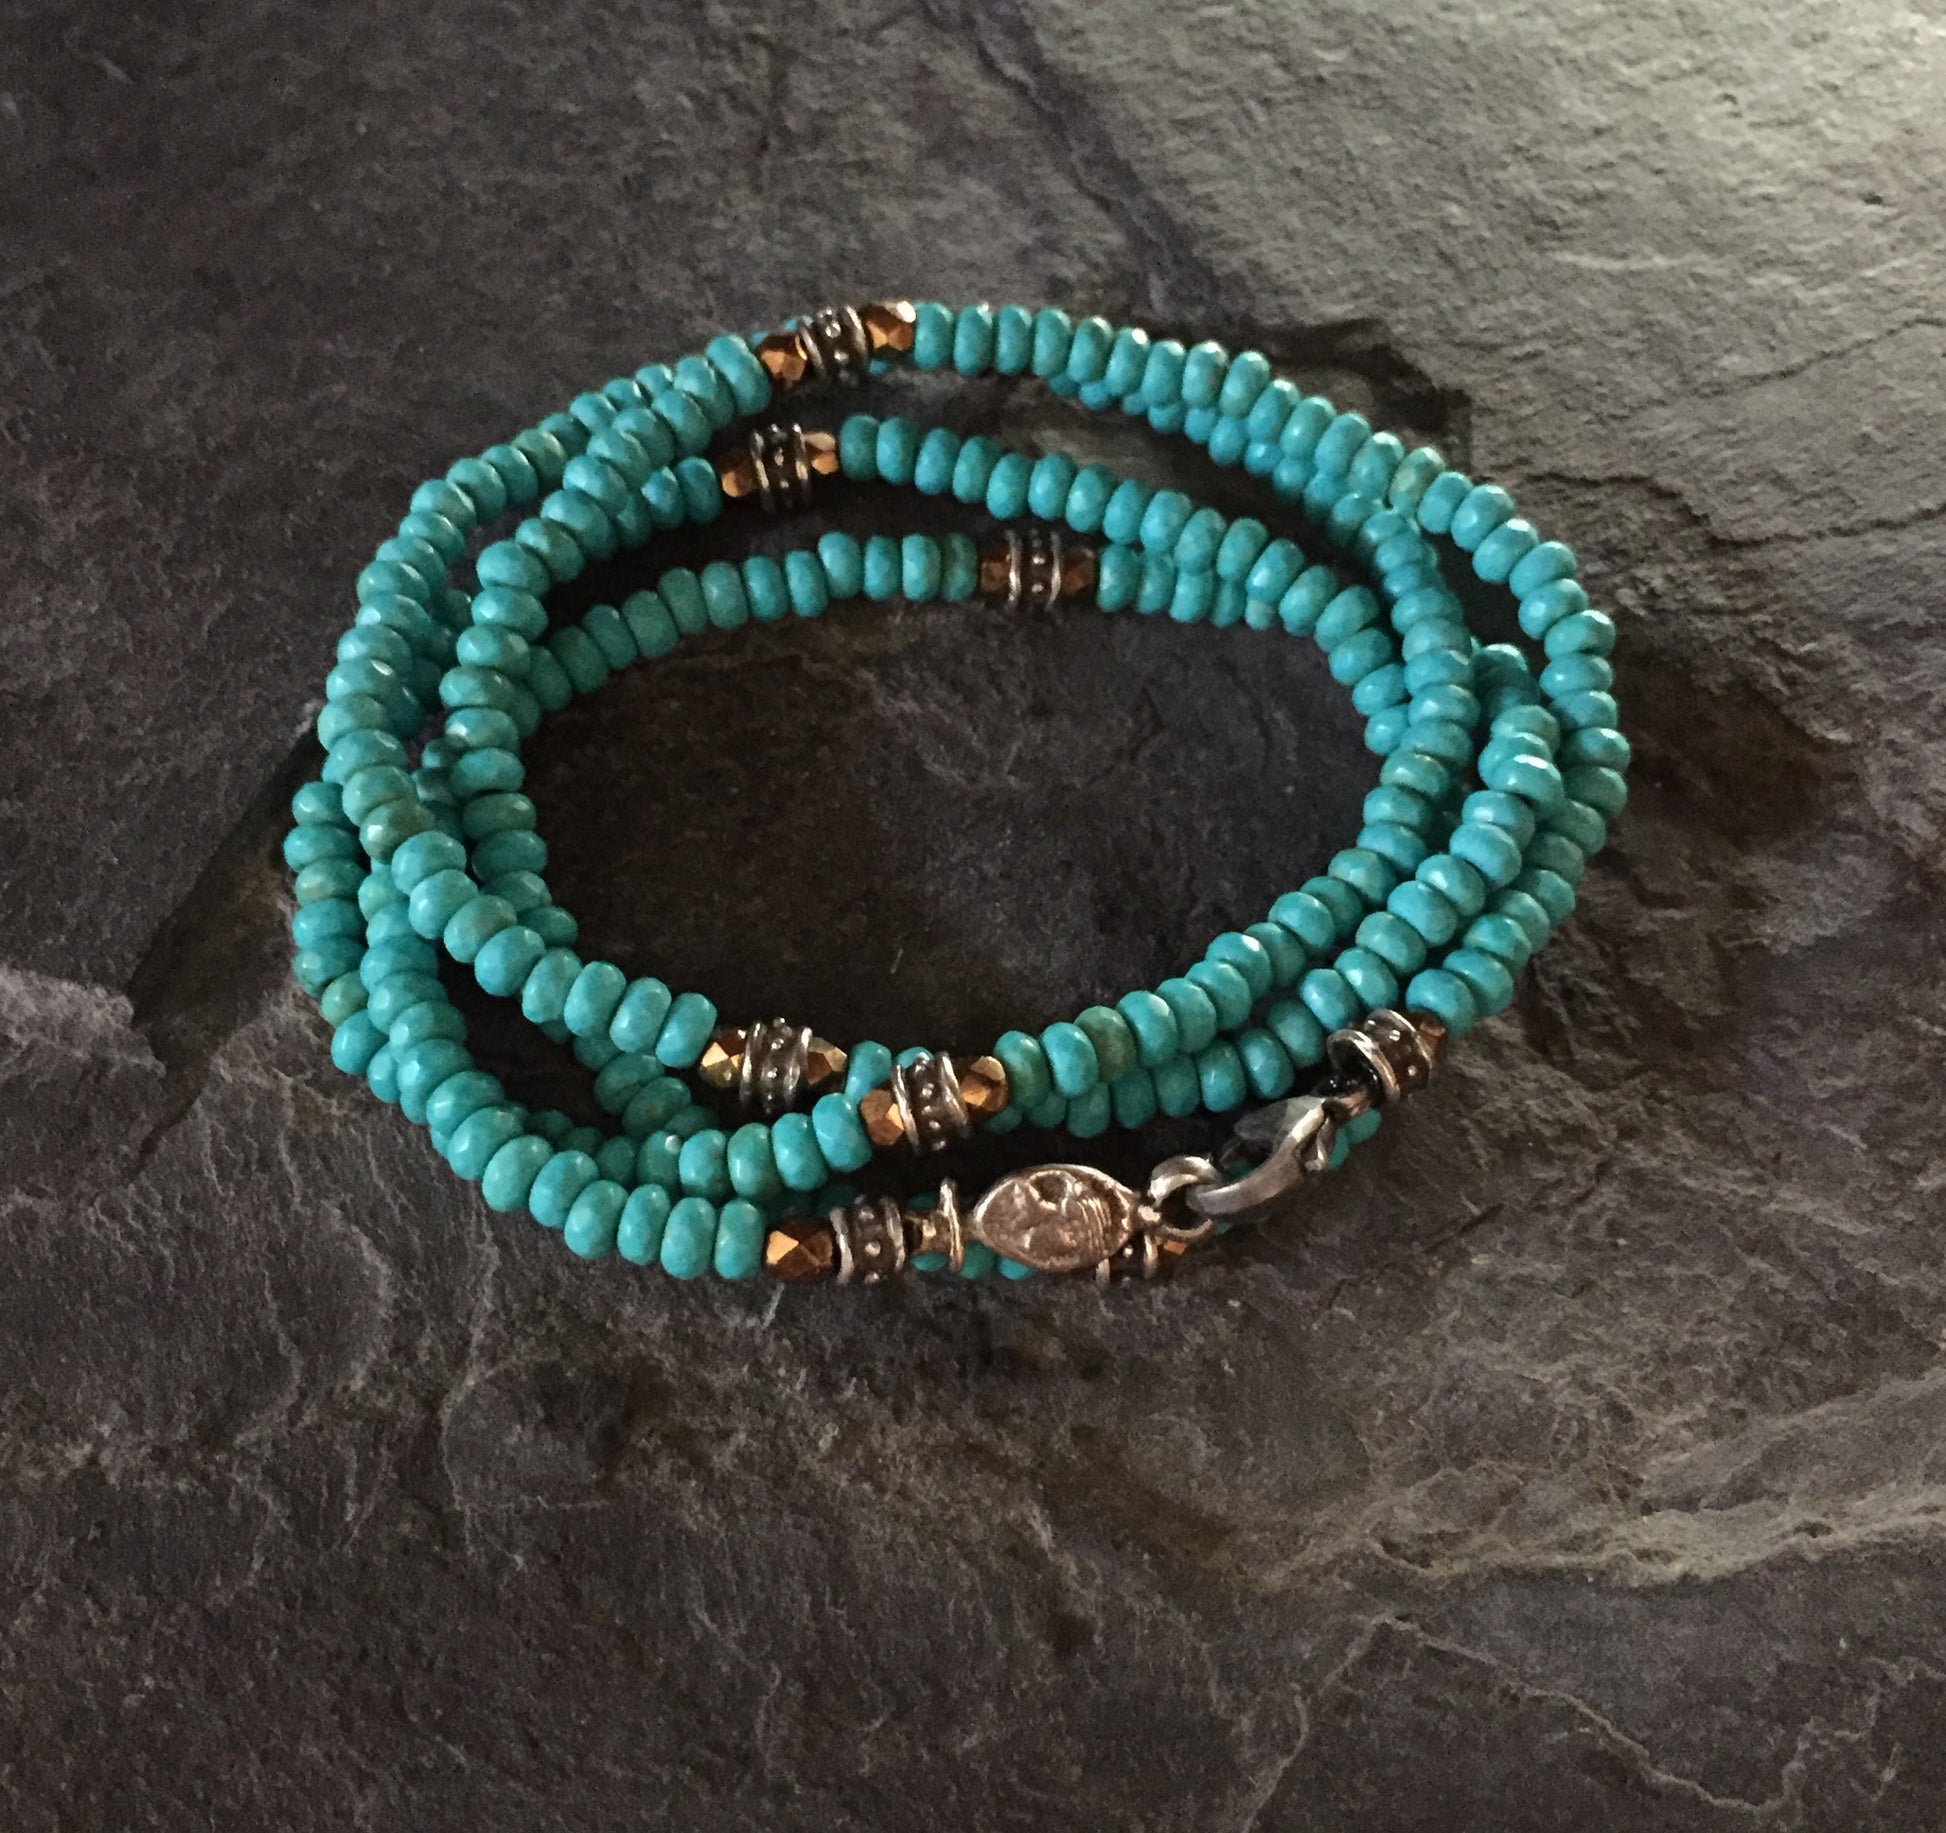 Bracelet - Blue Magnesite and Silver Roundels by R.Paul